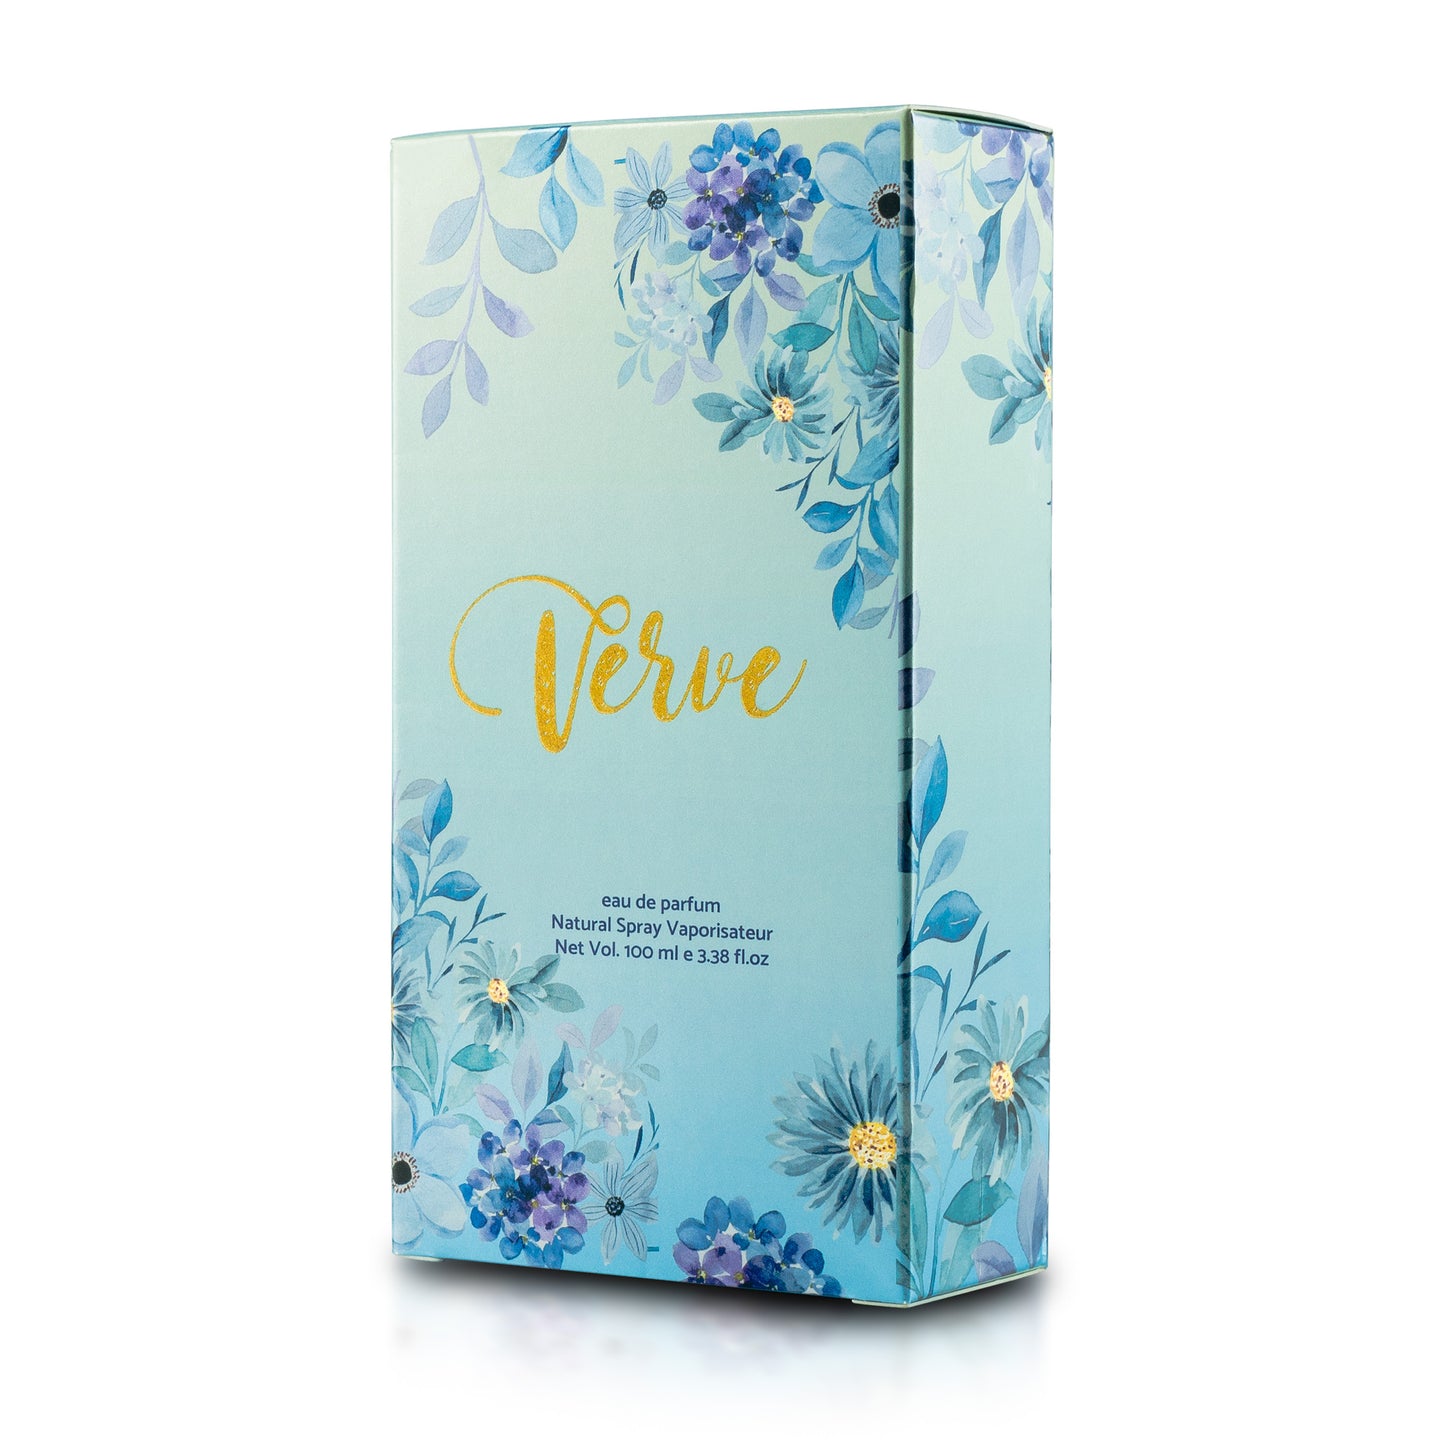 A Symphony of Scents: Dive into the Allure of Our EDP Perfume Collection (100 ml) - Verve tynimo